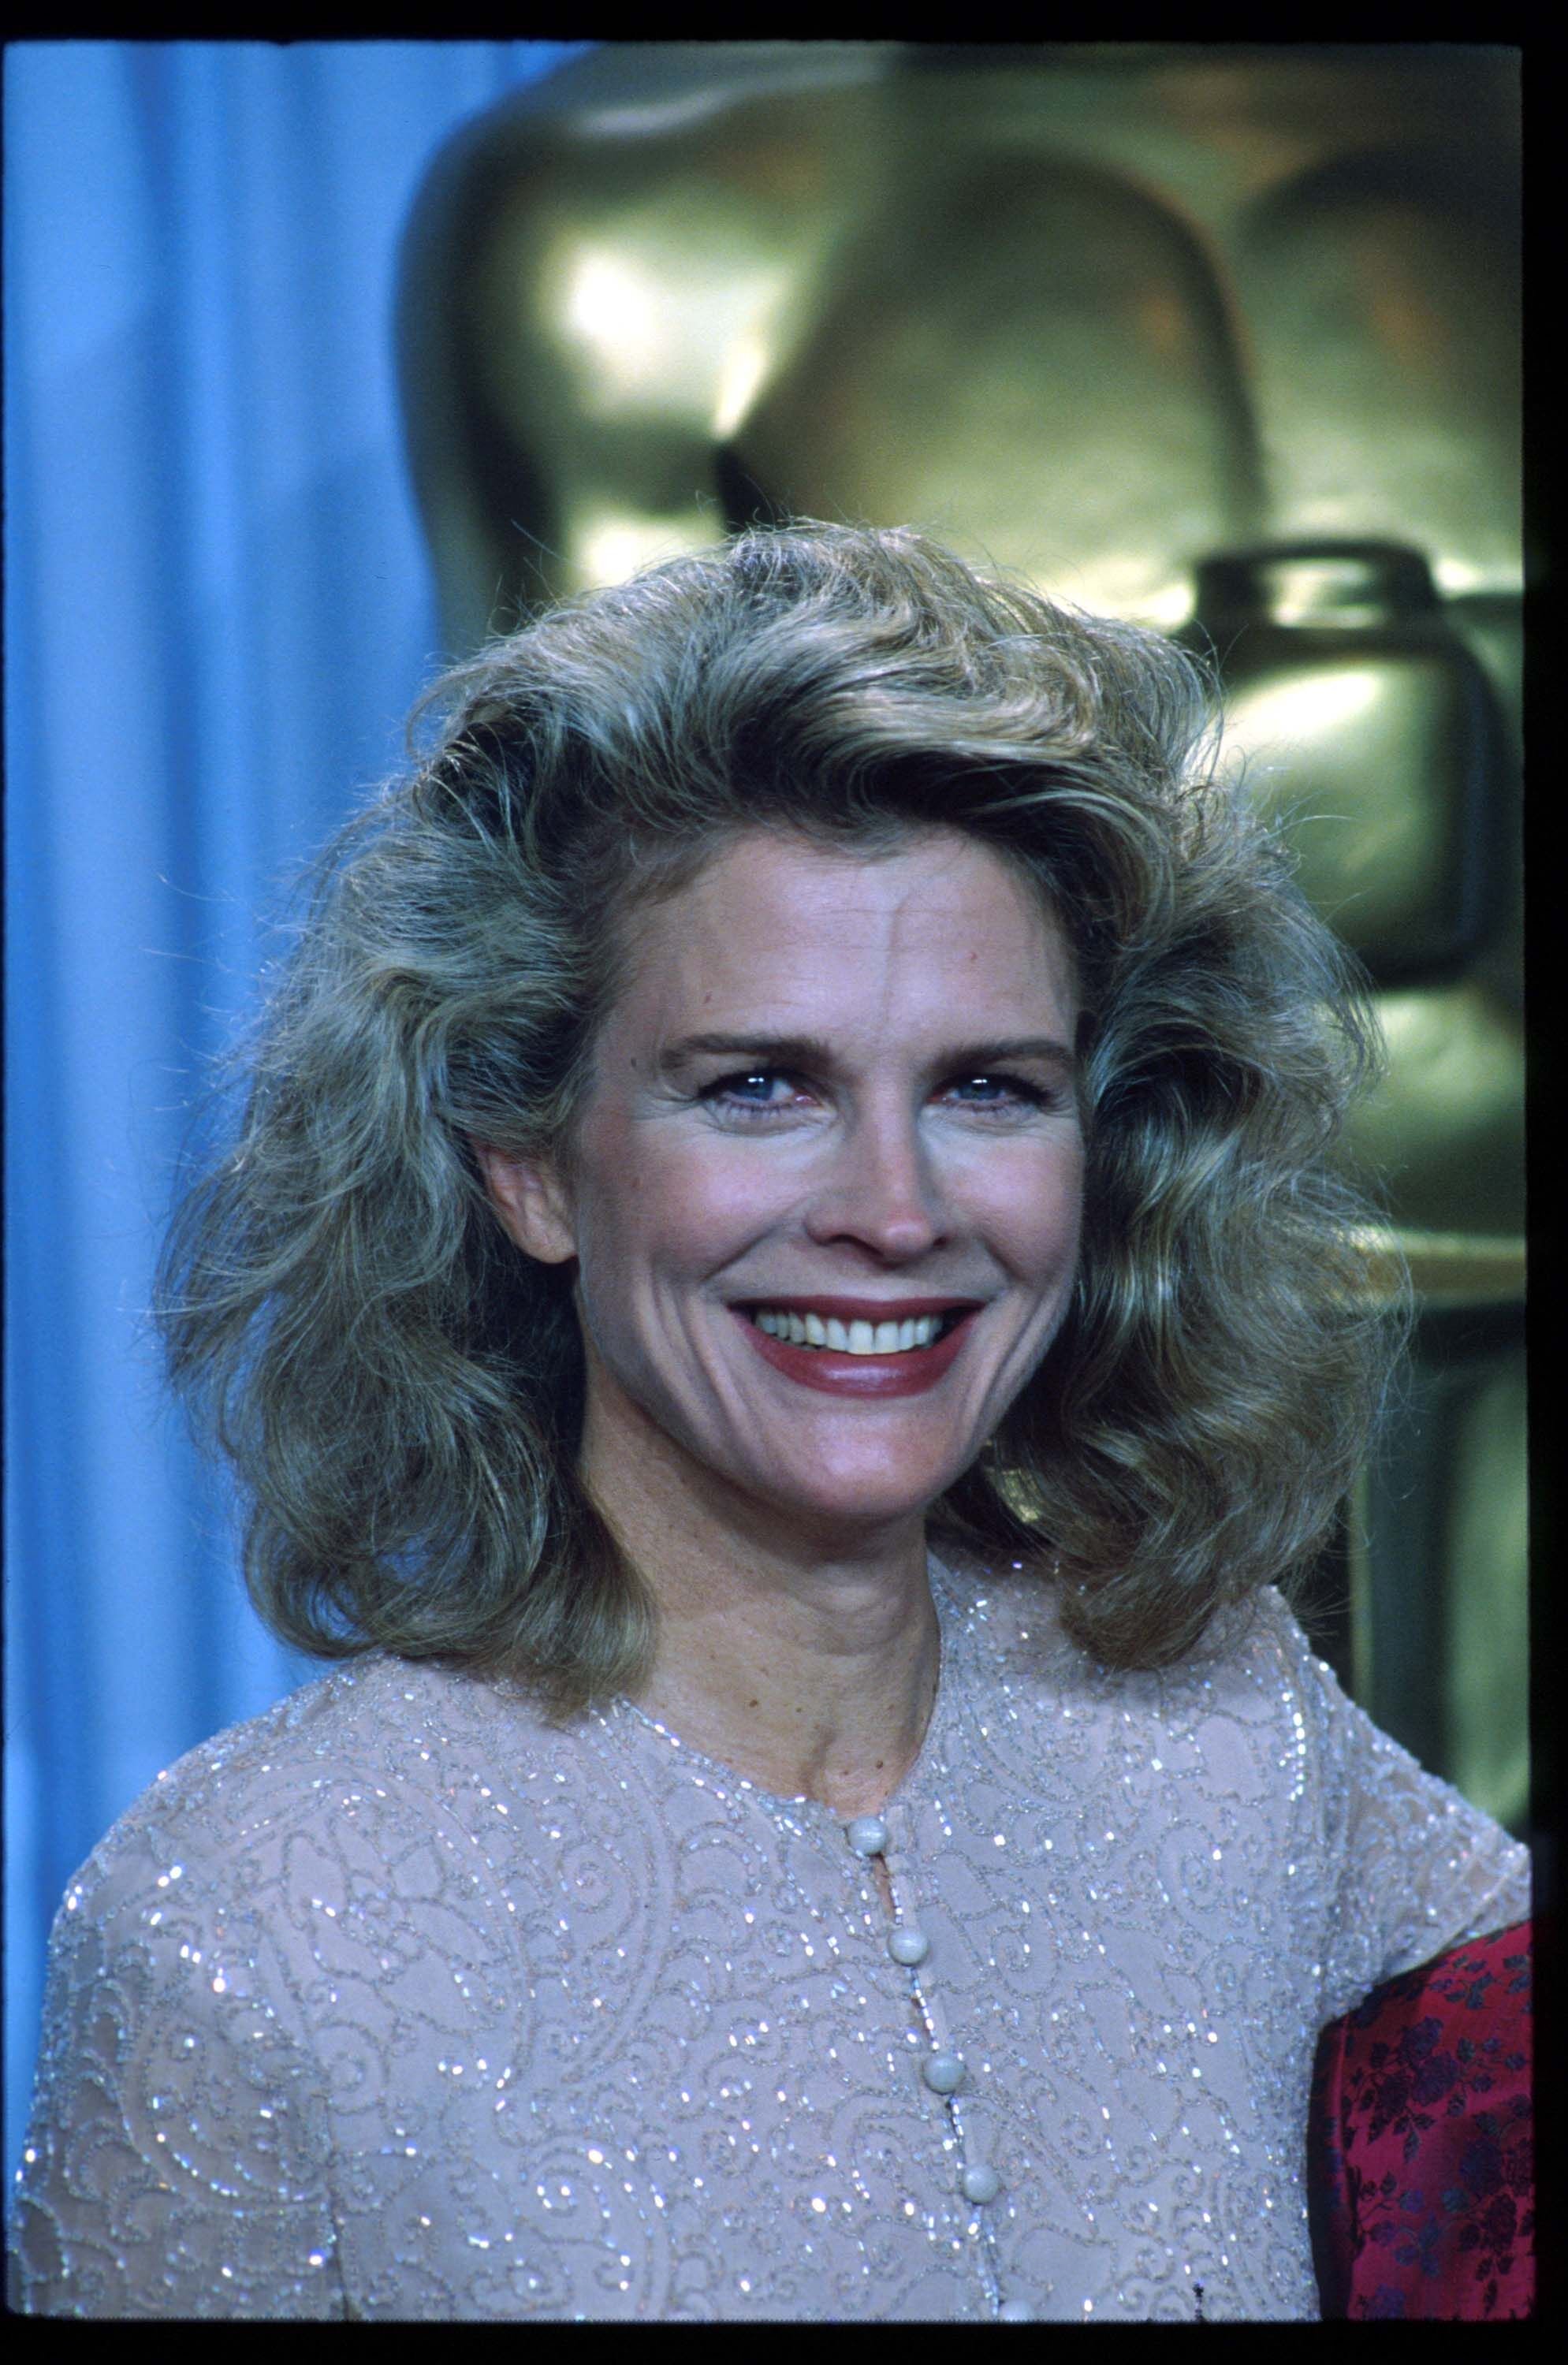 Candice Bergen stands backstage during the 62nd Academy Awards ceremony March 26, 1990 in Los Angeles, CA. | Source: Getty Images